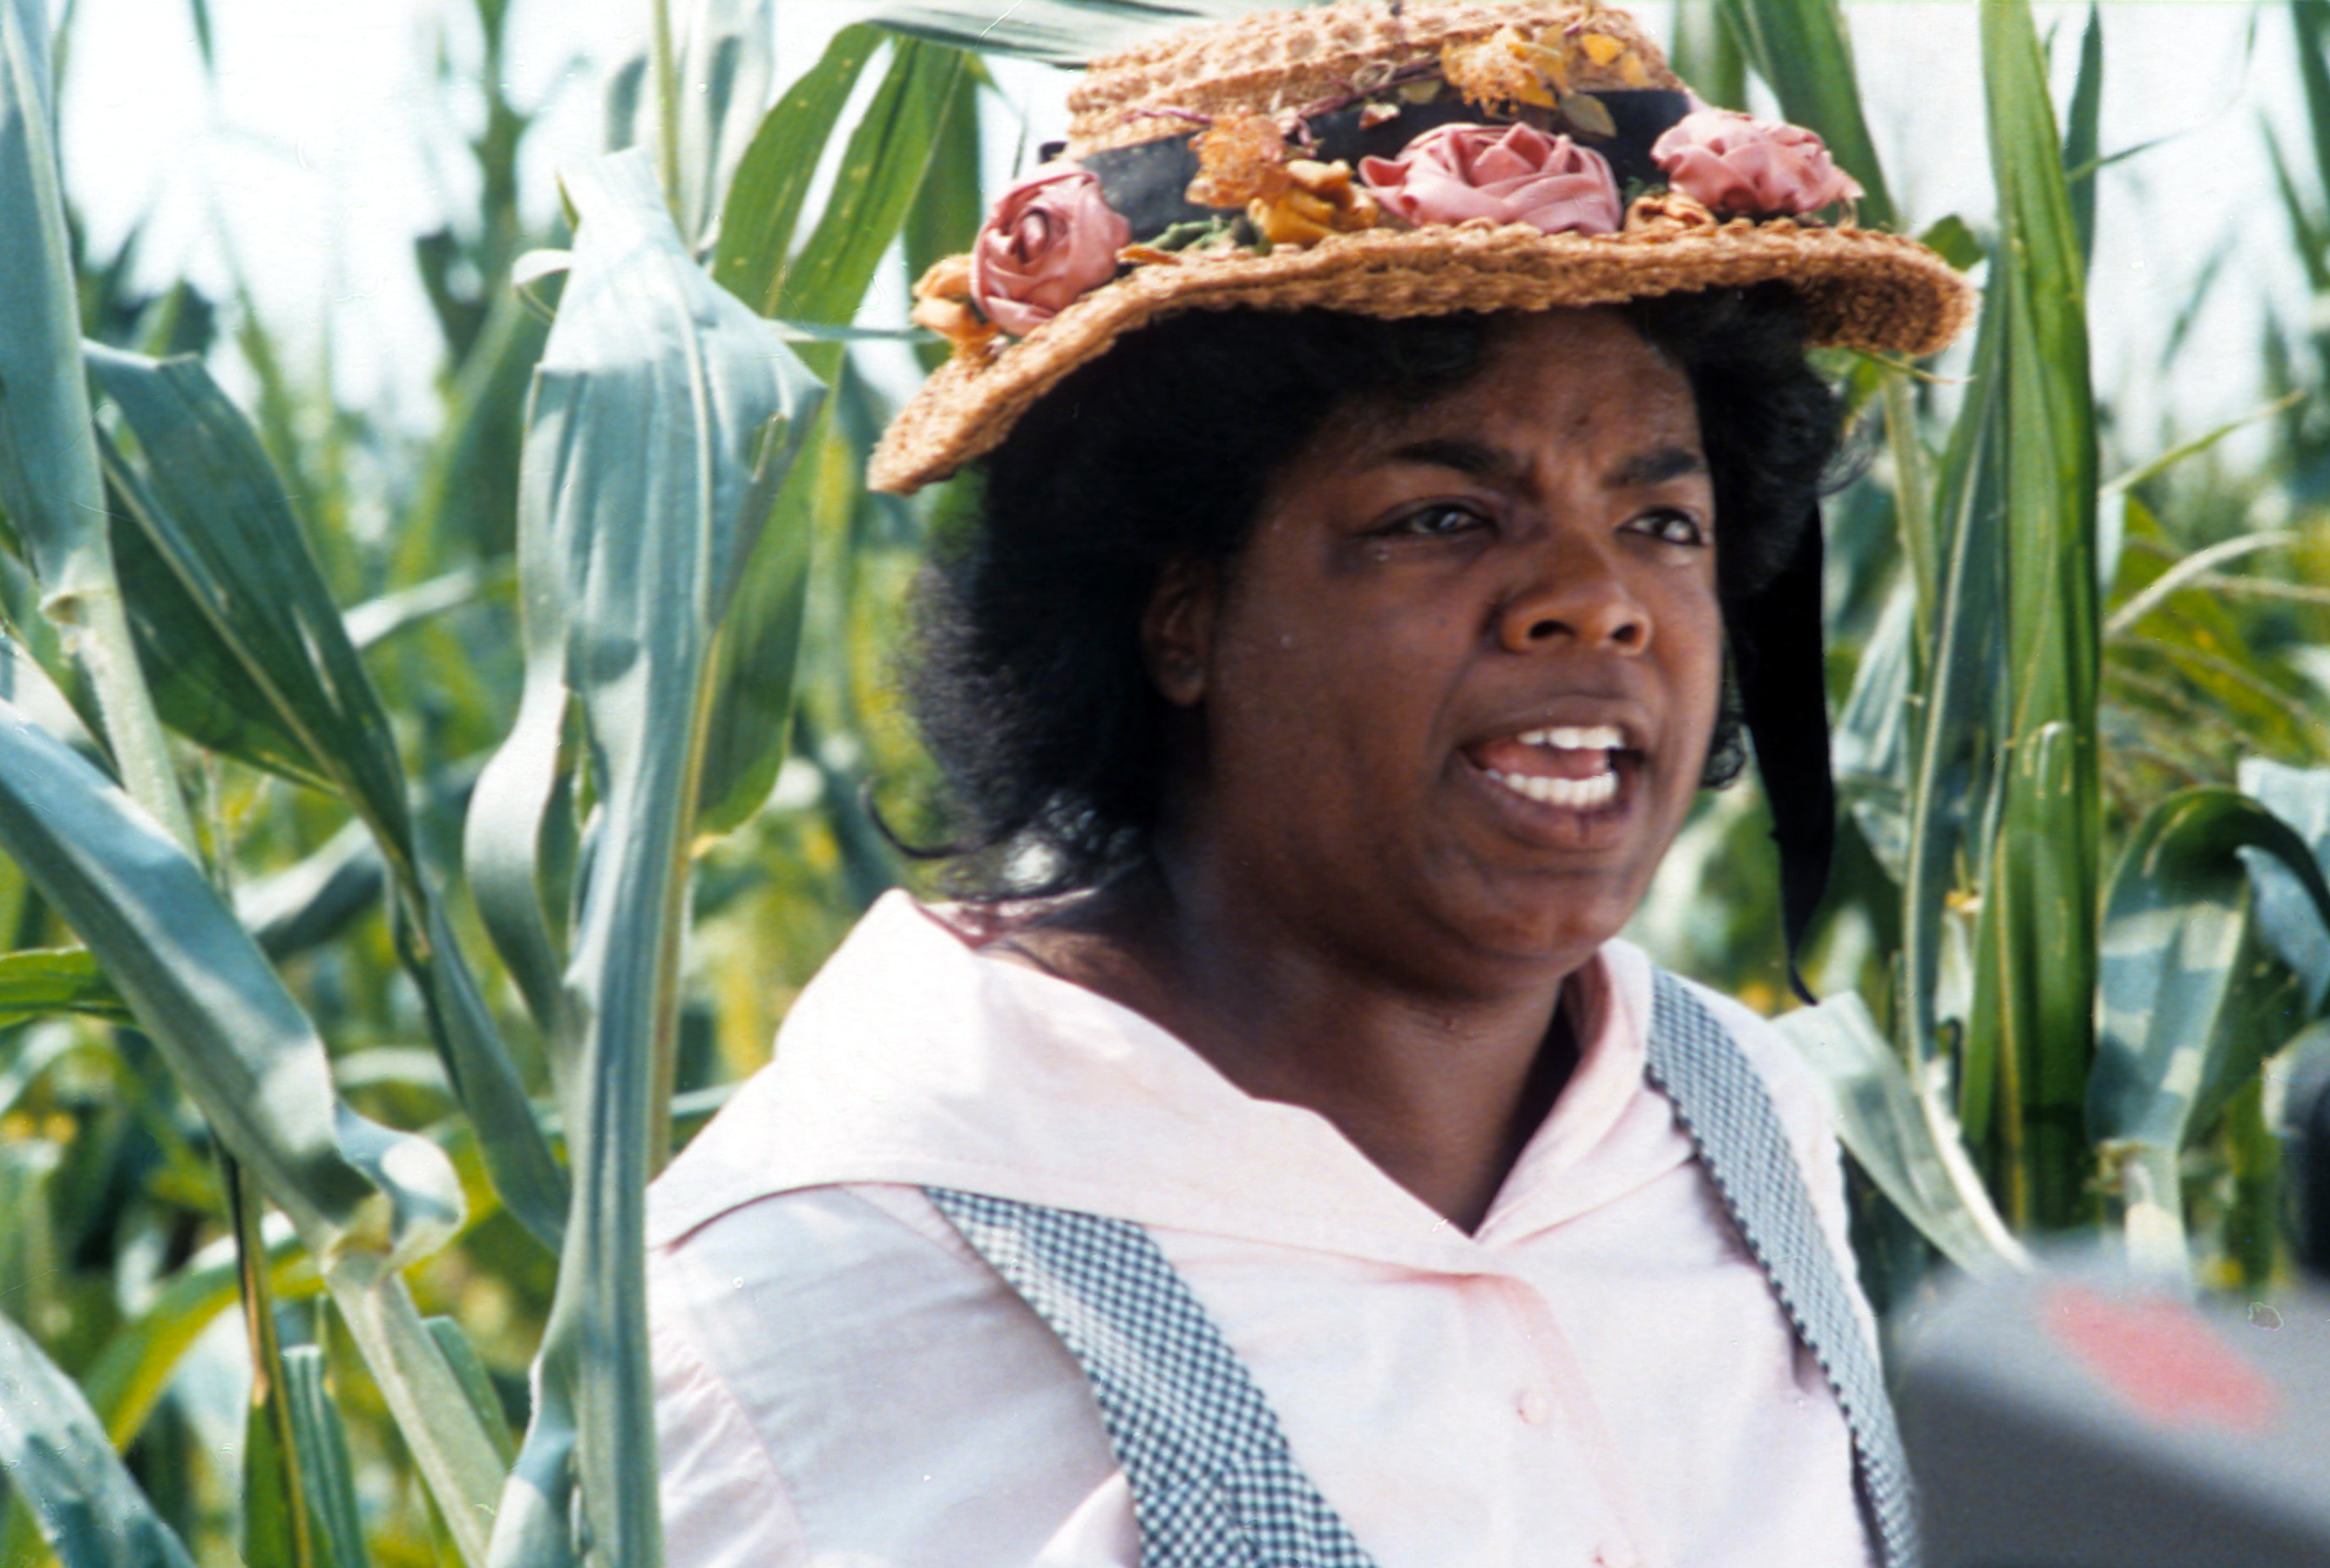 Oprah Winfrey in a scene from "The Color Purple" in 1985 | Source: Getty Images